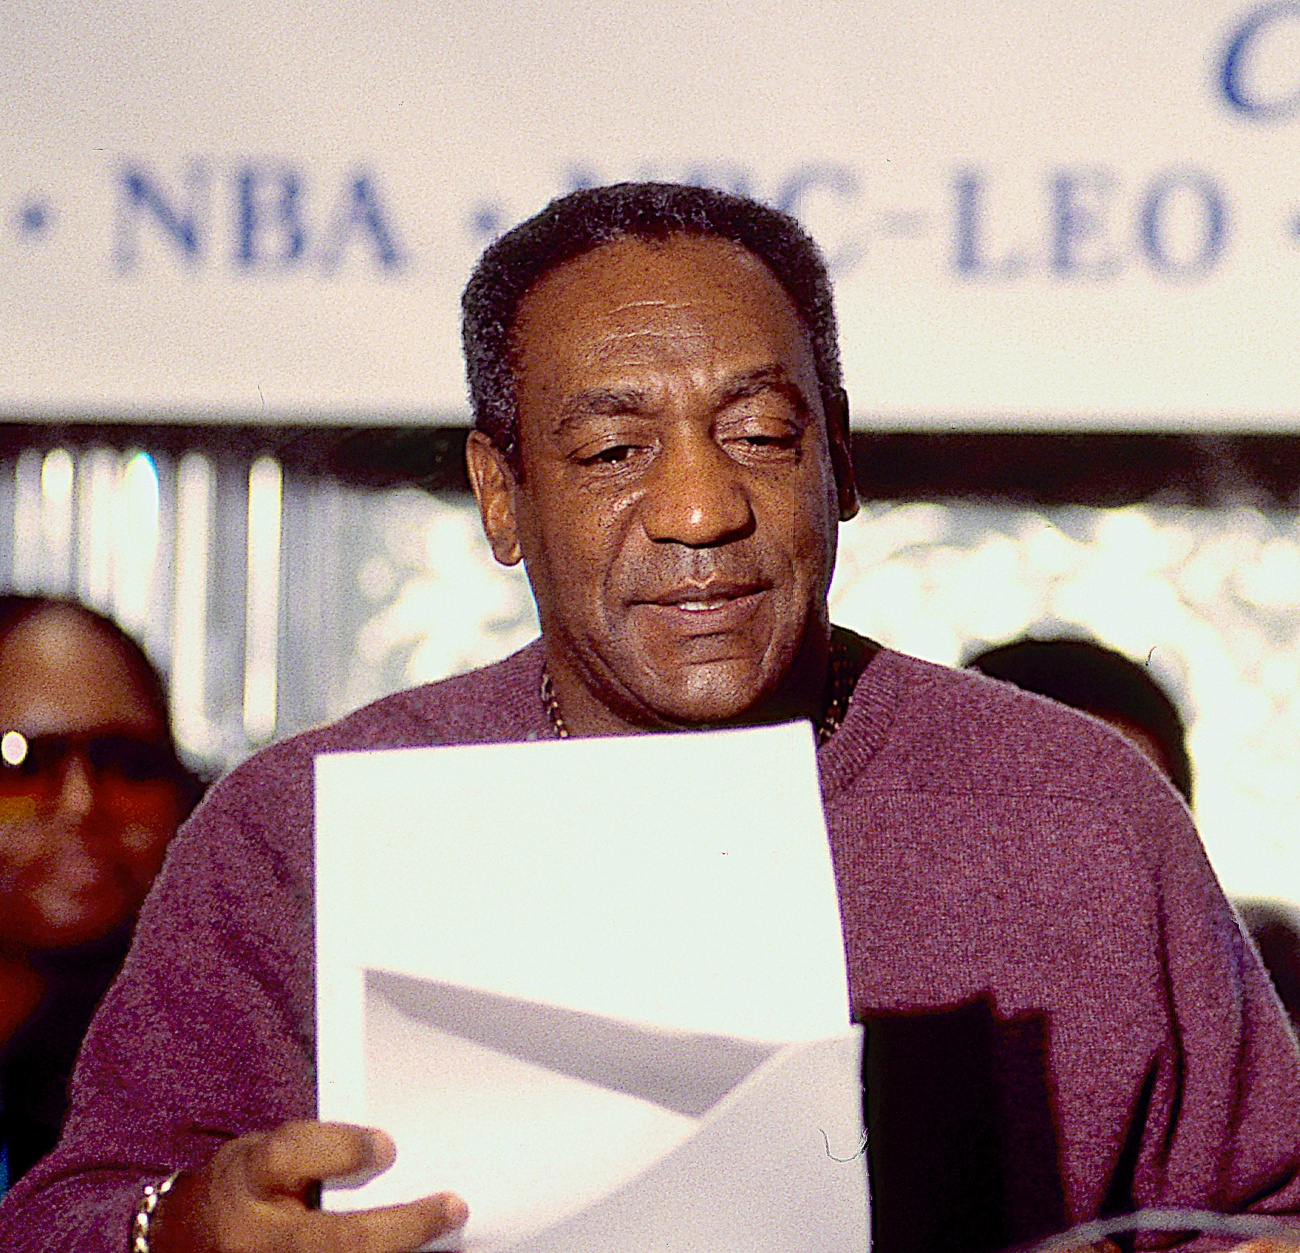 Comedian Bill Cosby faces another allegation: model claims he drugged and assaulted her in 1969